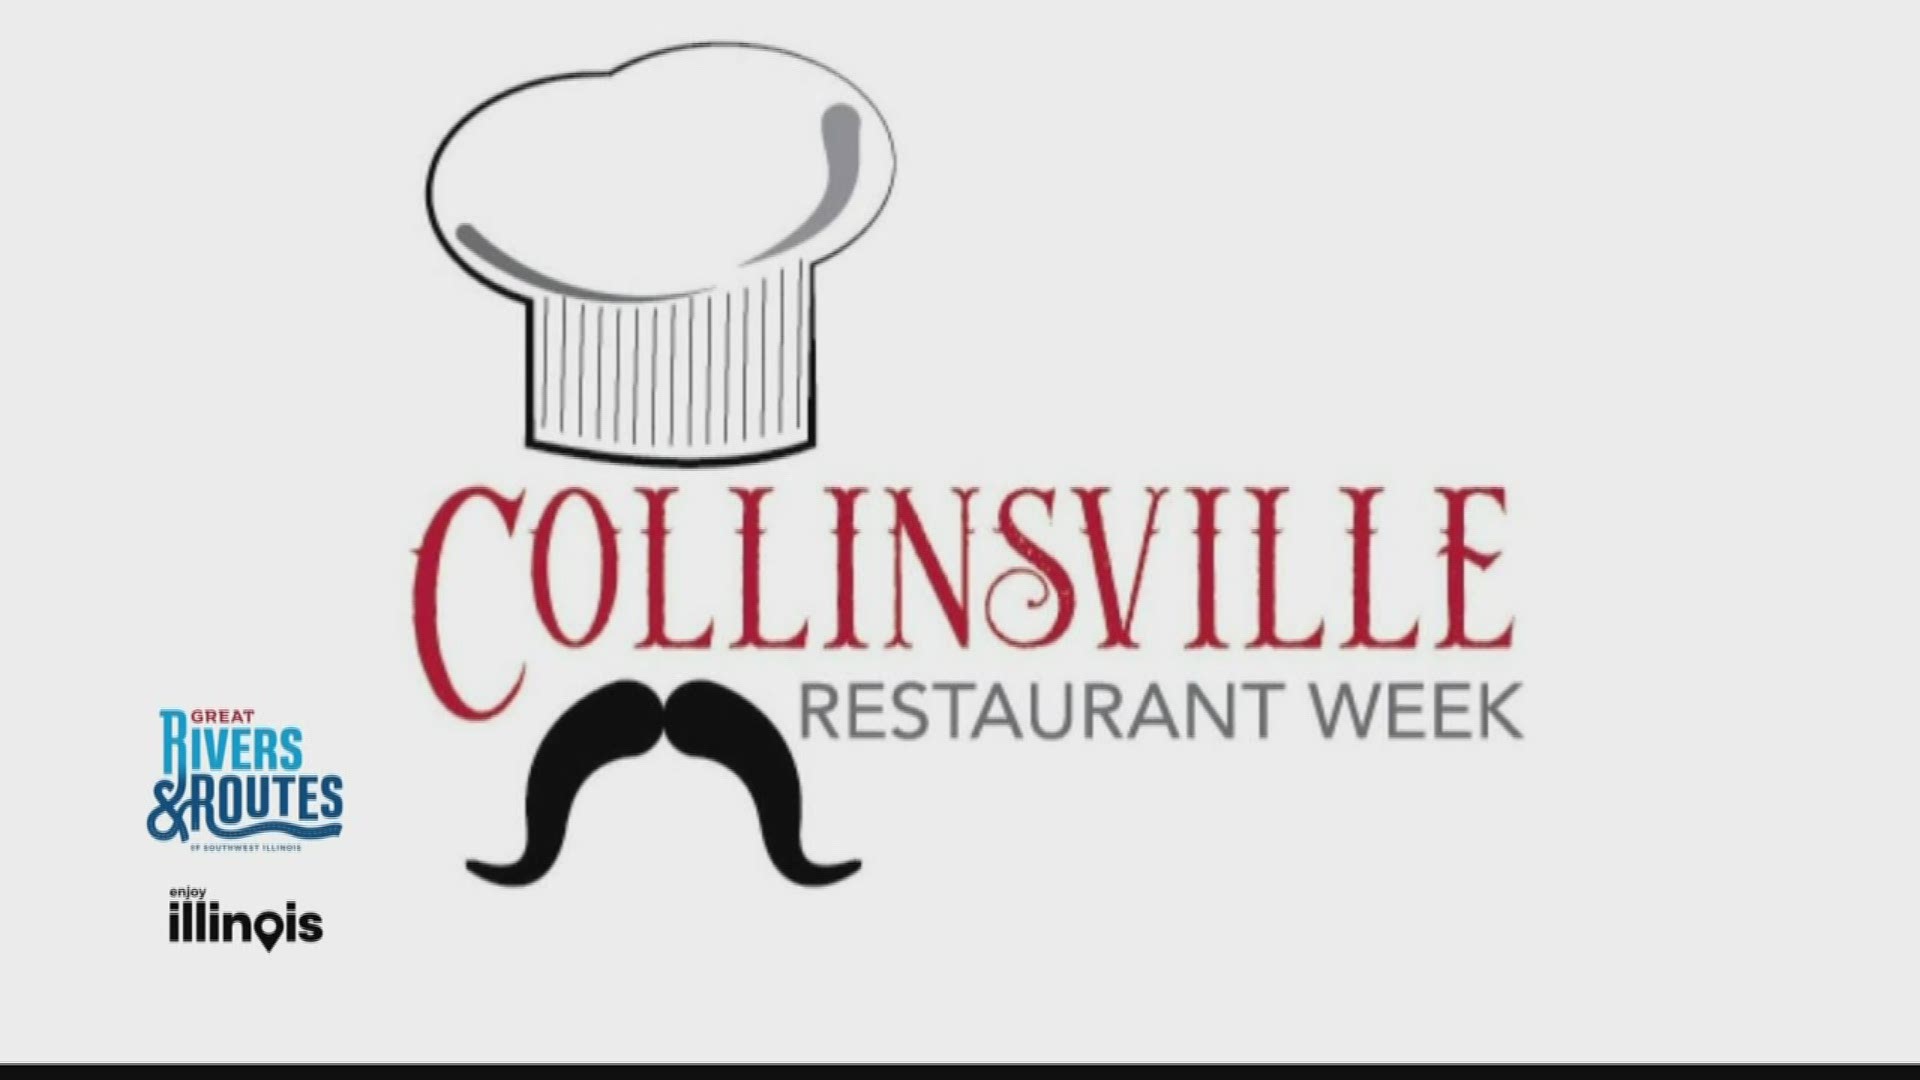 Now is the perfect time to visit Collinsville for their first Restaurant Week.